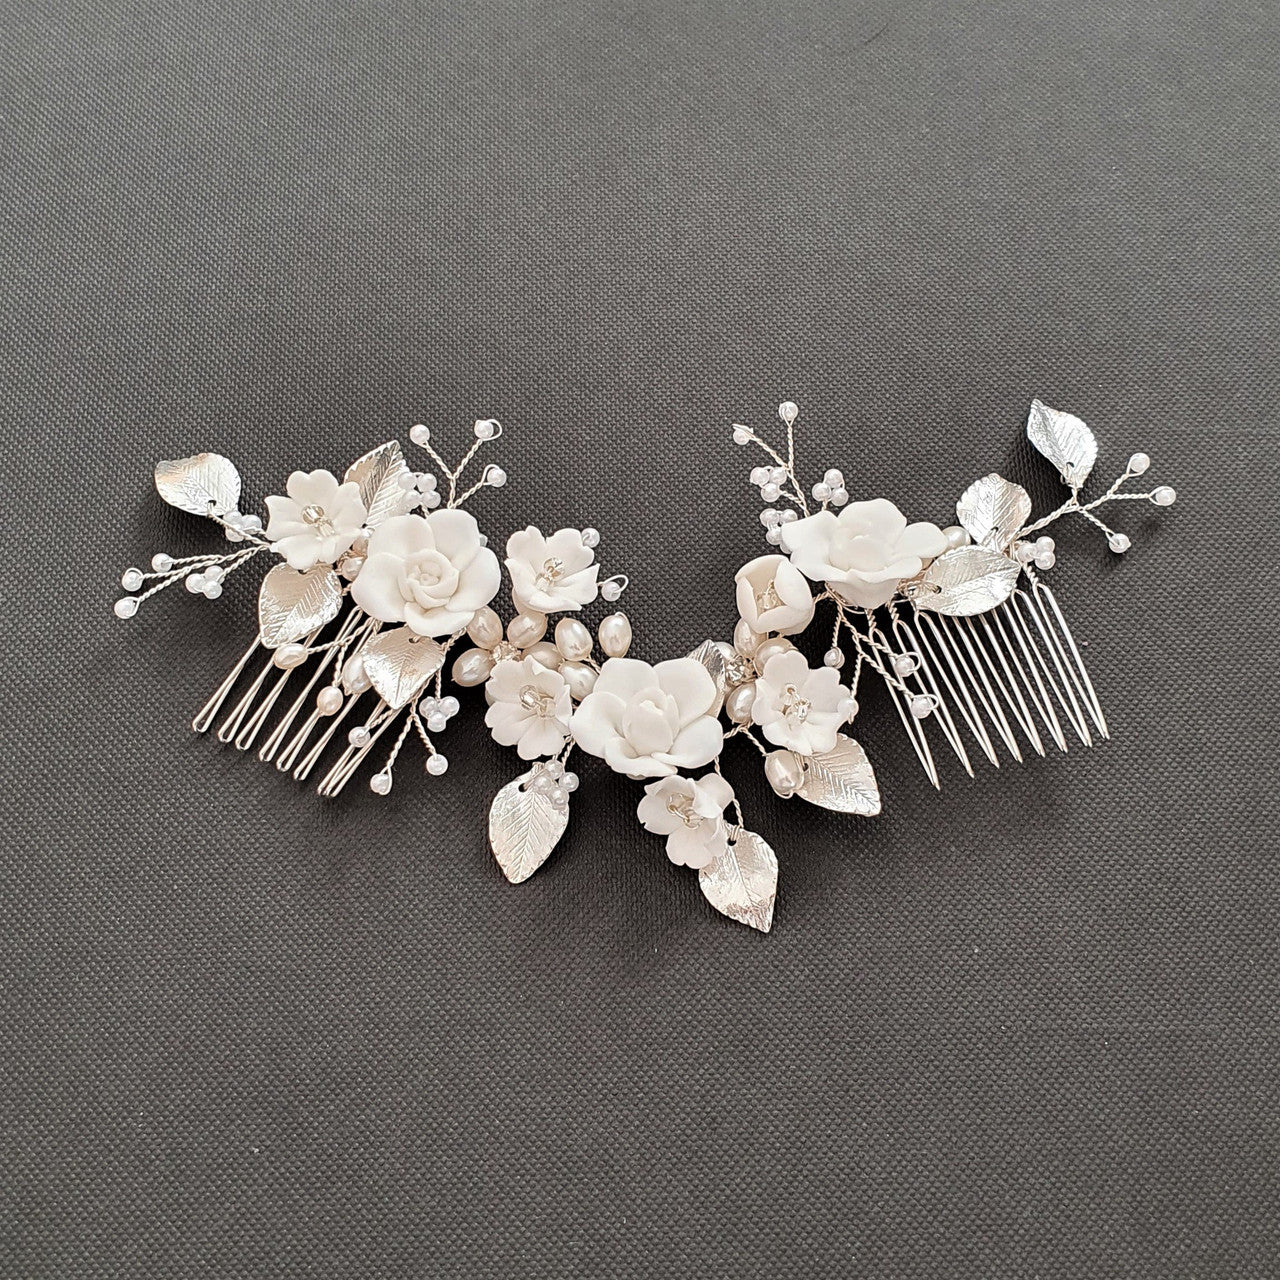 Double Comb Bridal Hairpiece with White Flowers-Blossom